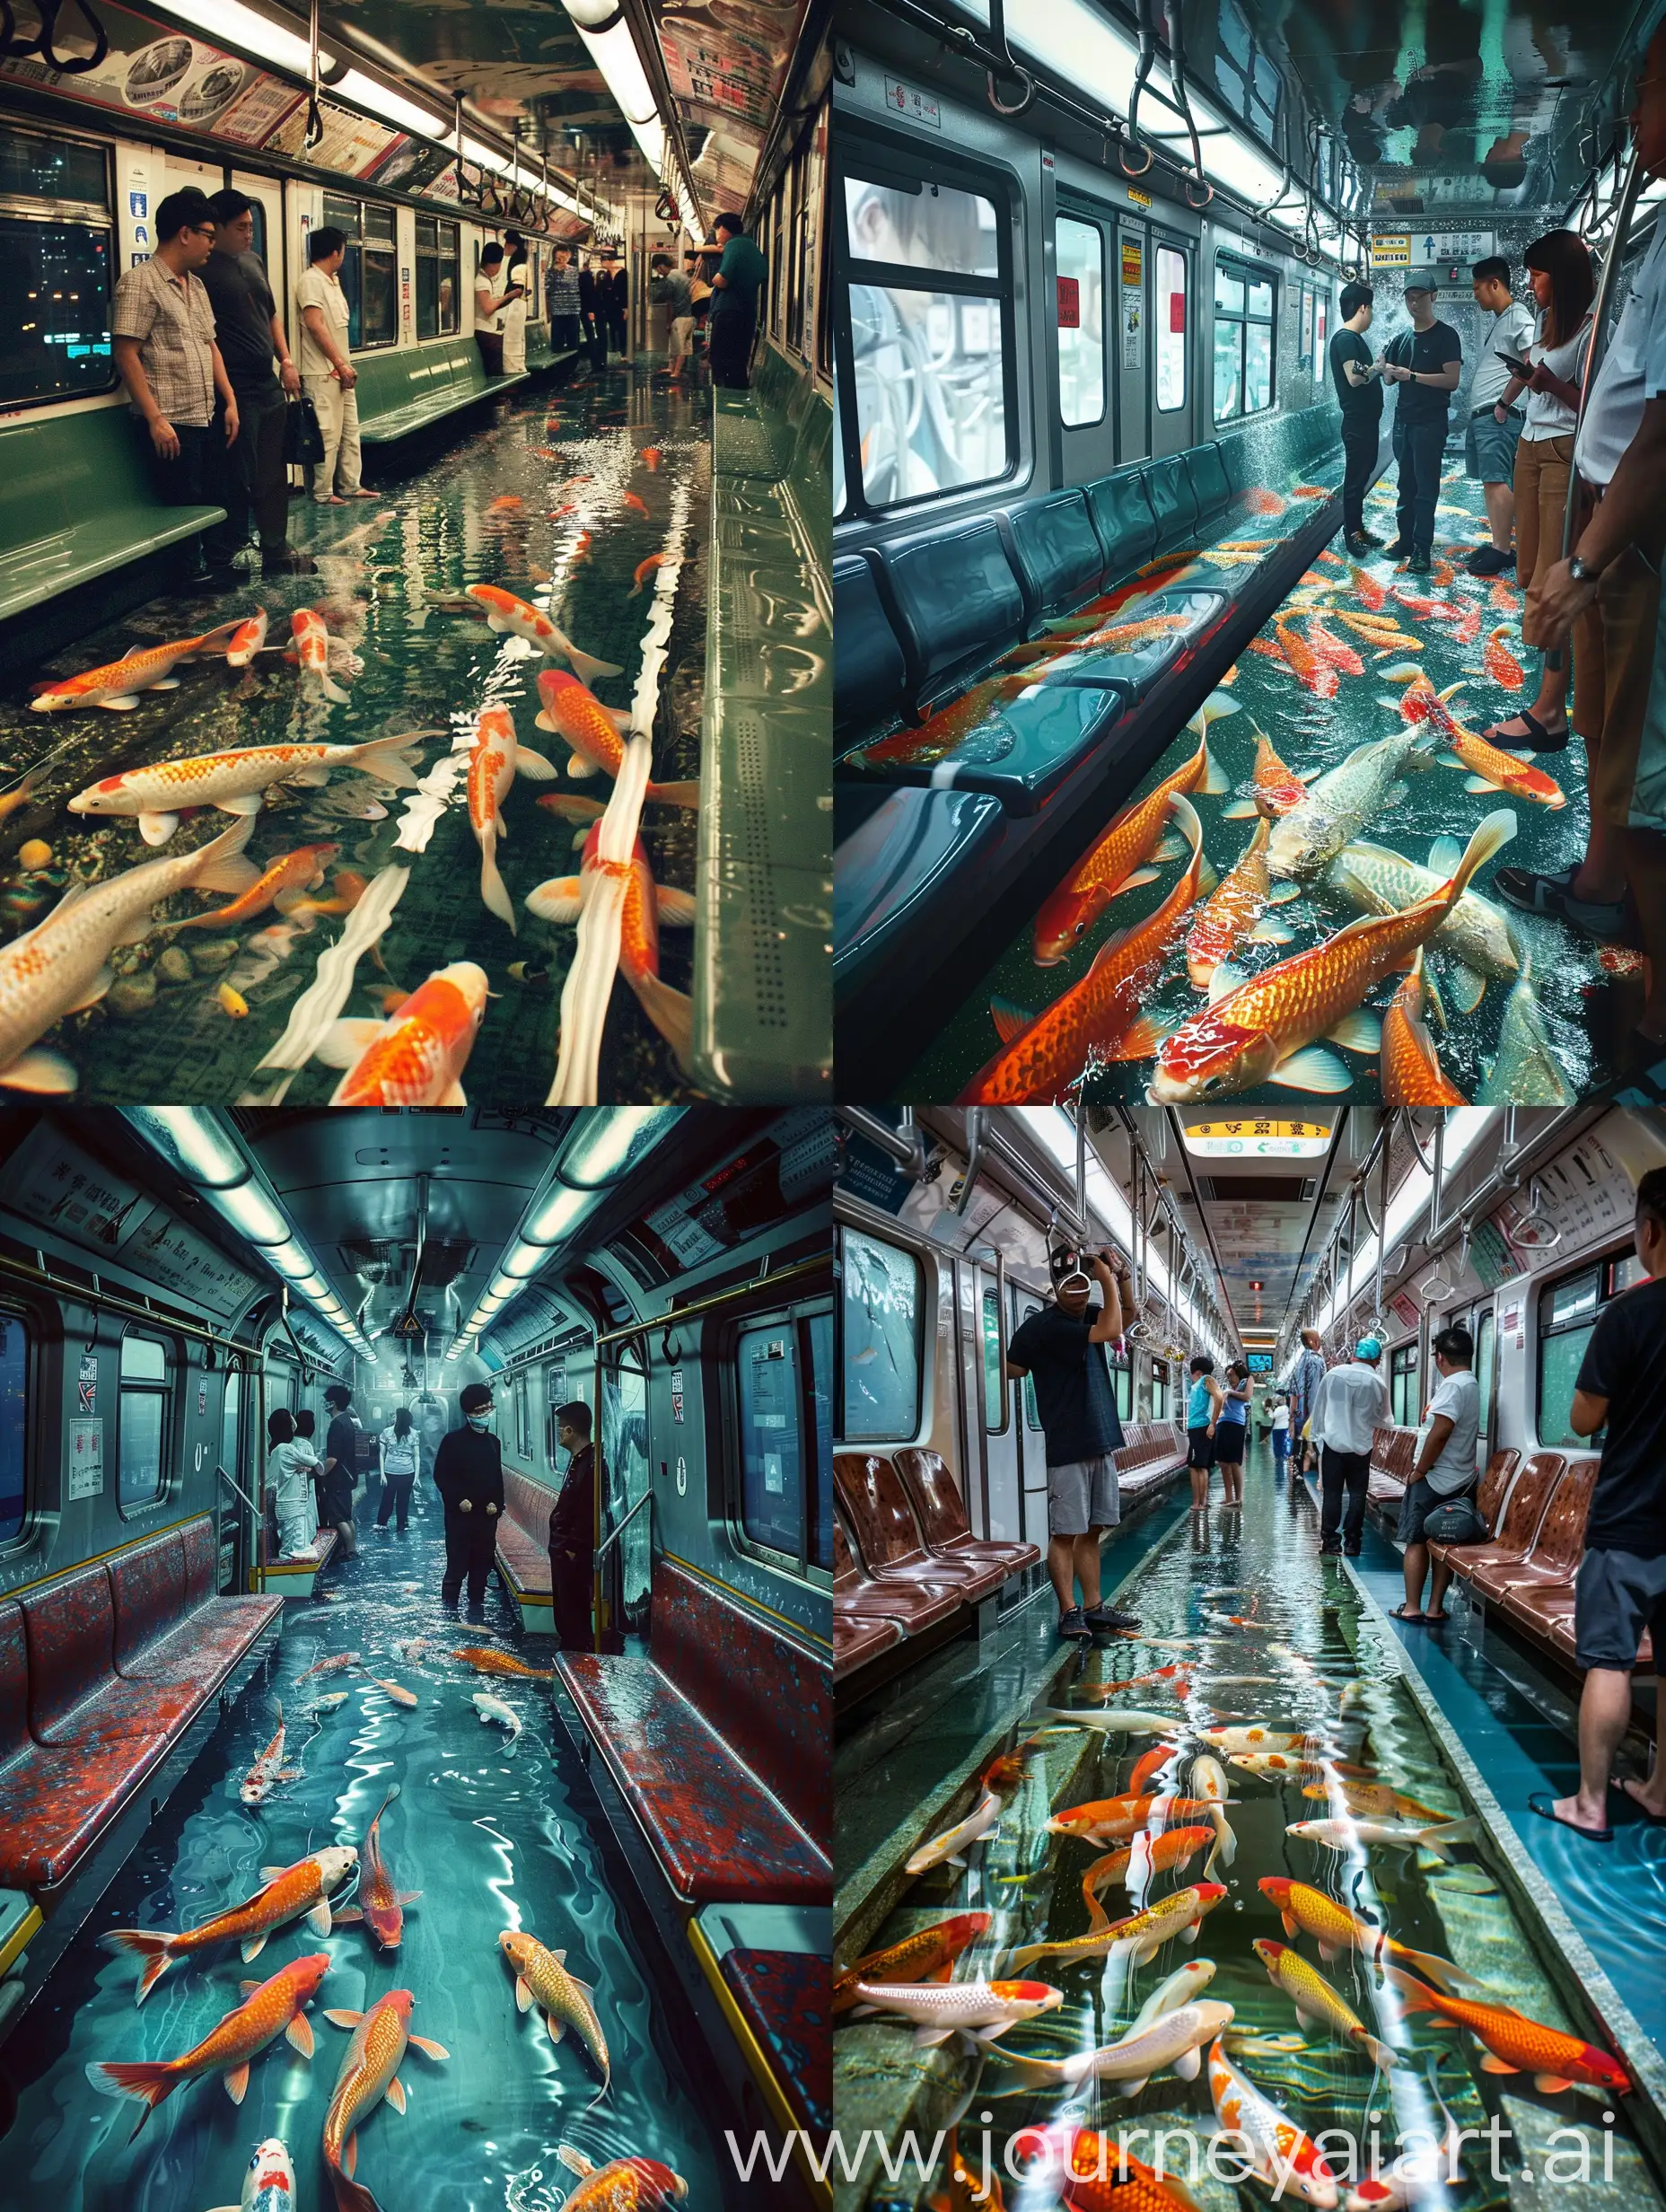 A metro train in Hongkong, slightly filled with water and adorned with graceful koi fish swimming. People stand on the benches, cautious and afraid of getting wet, as this surreal fusion of urban transport and underwater beauty creates an unexpected and intriguing scene. The contrast between the hesitant passengers and the serene aquatic environment adds a whimsical touch to this imaginative scenario